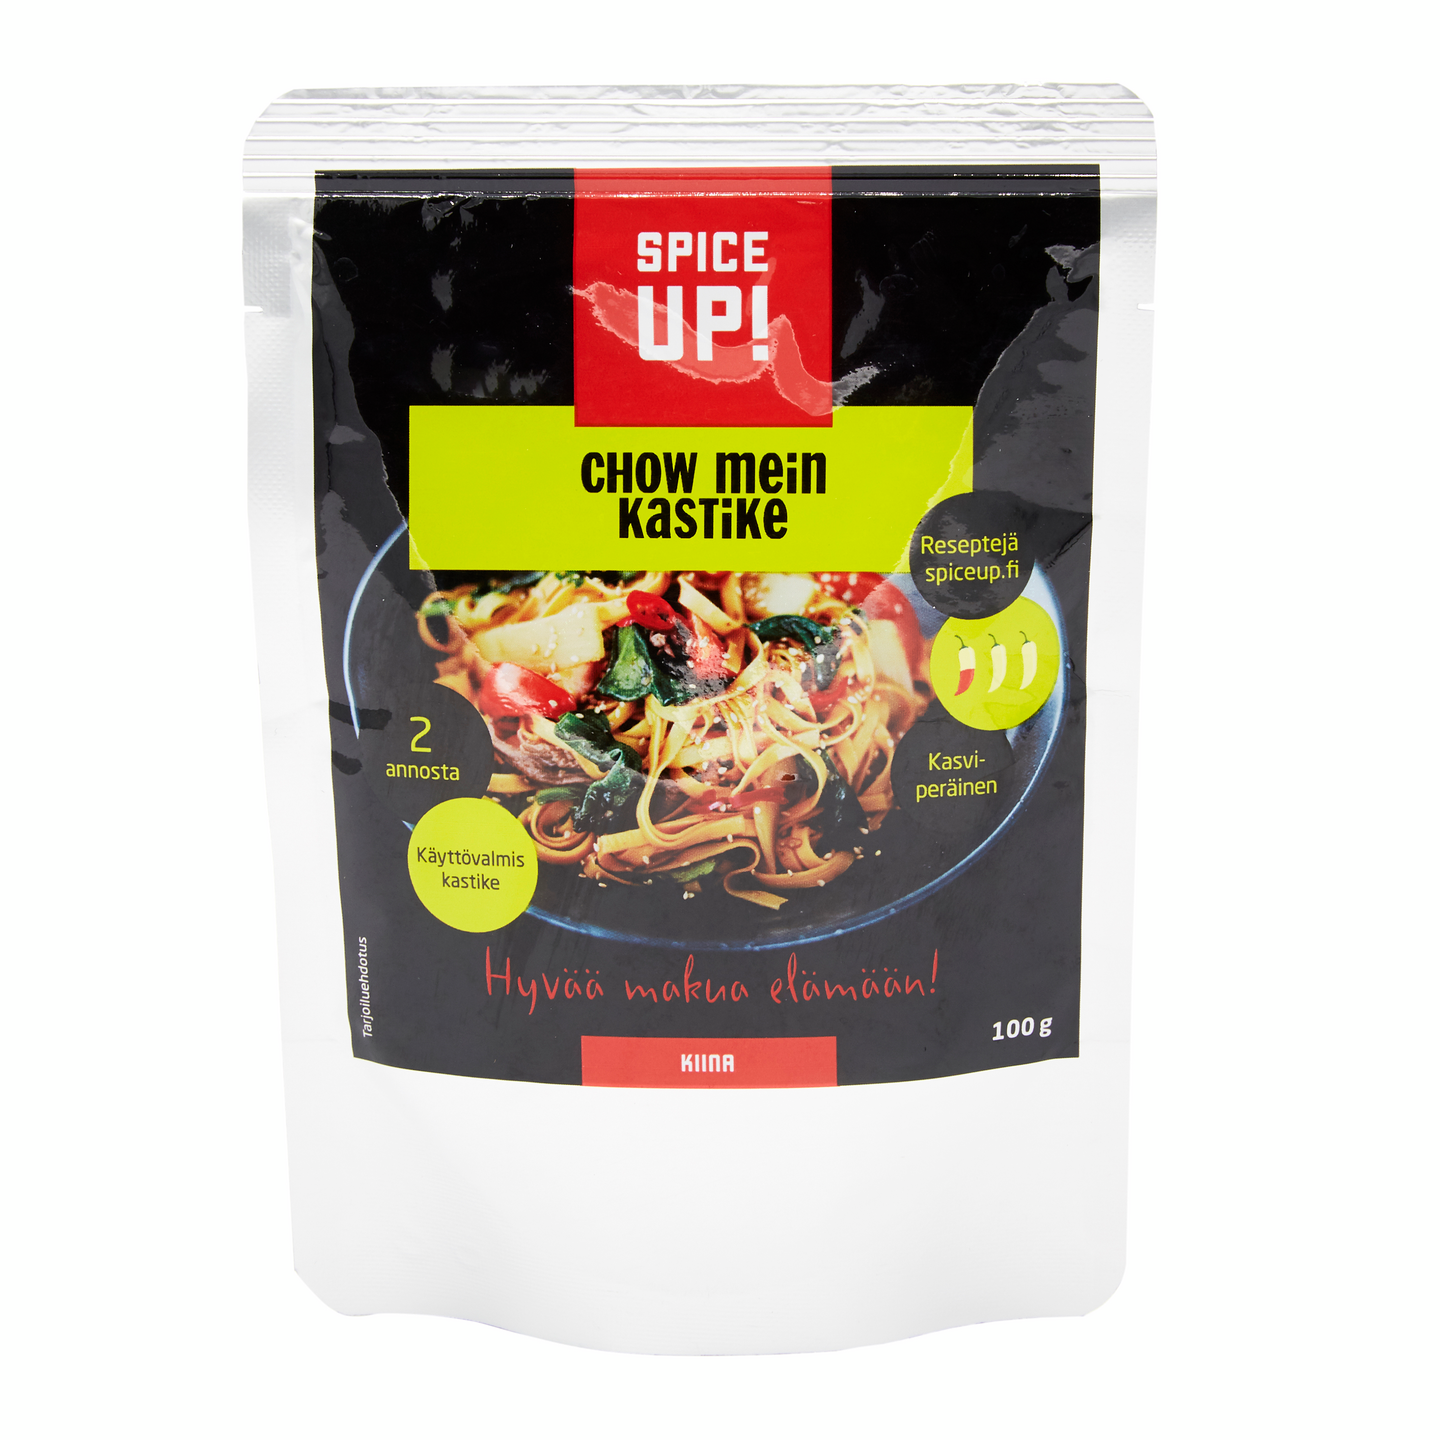 Spice Up Chow mein kastike 100g